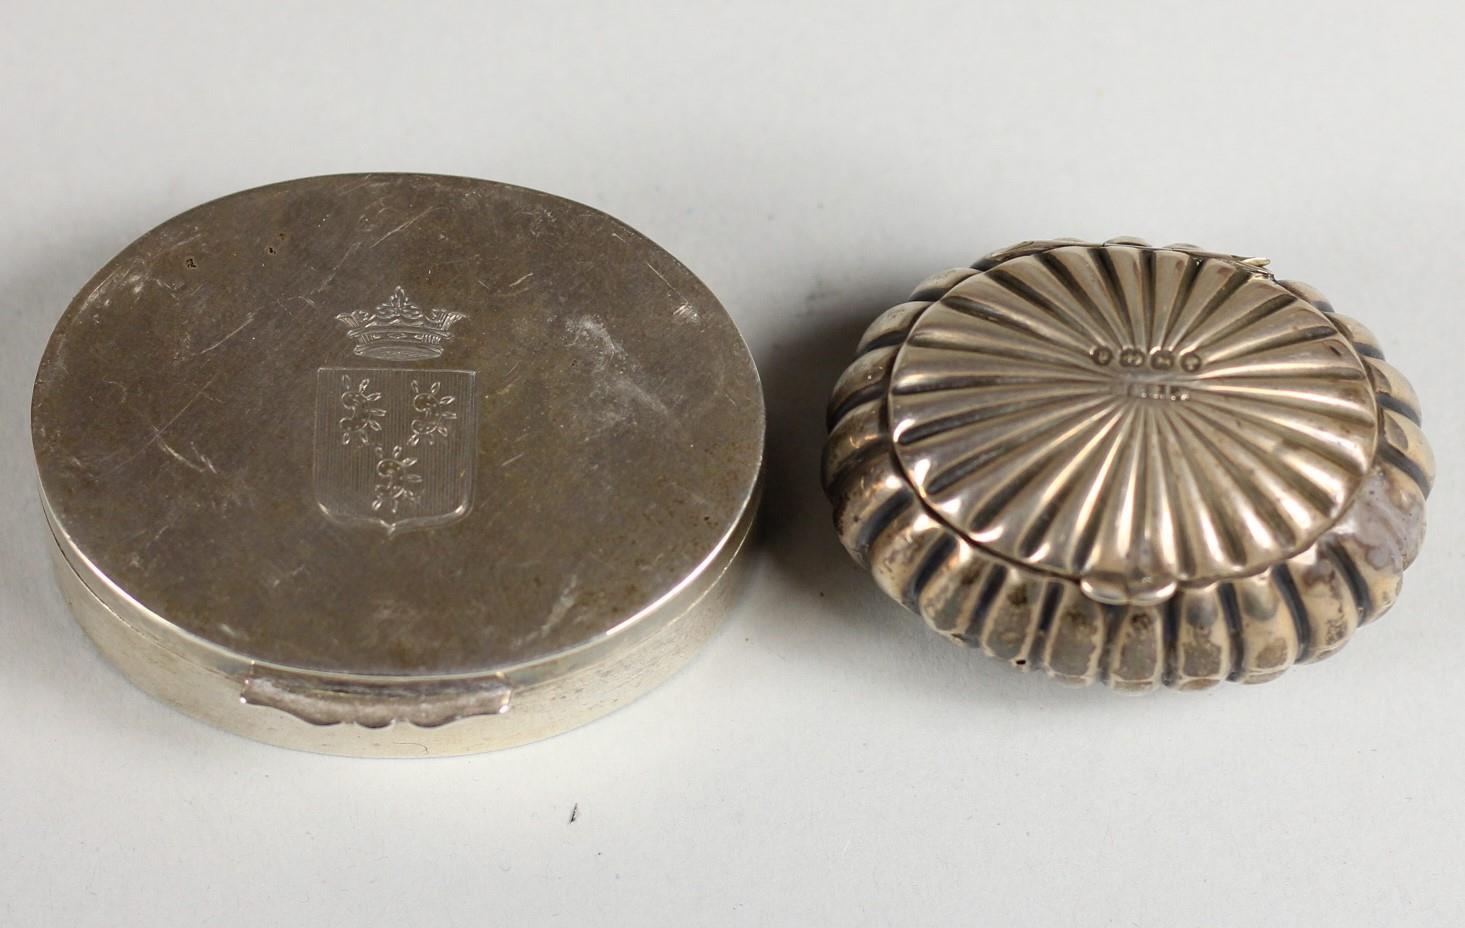 An Edwardian silver oval pill box, Birmingham 1901, the hinged lid with armorial crest, 5.5 x 4.0